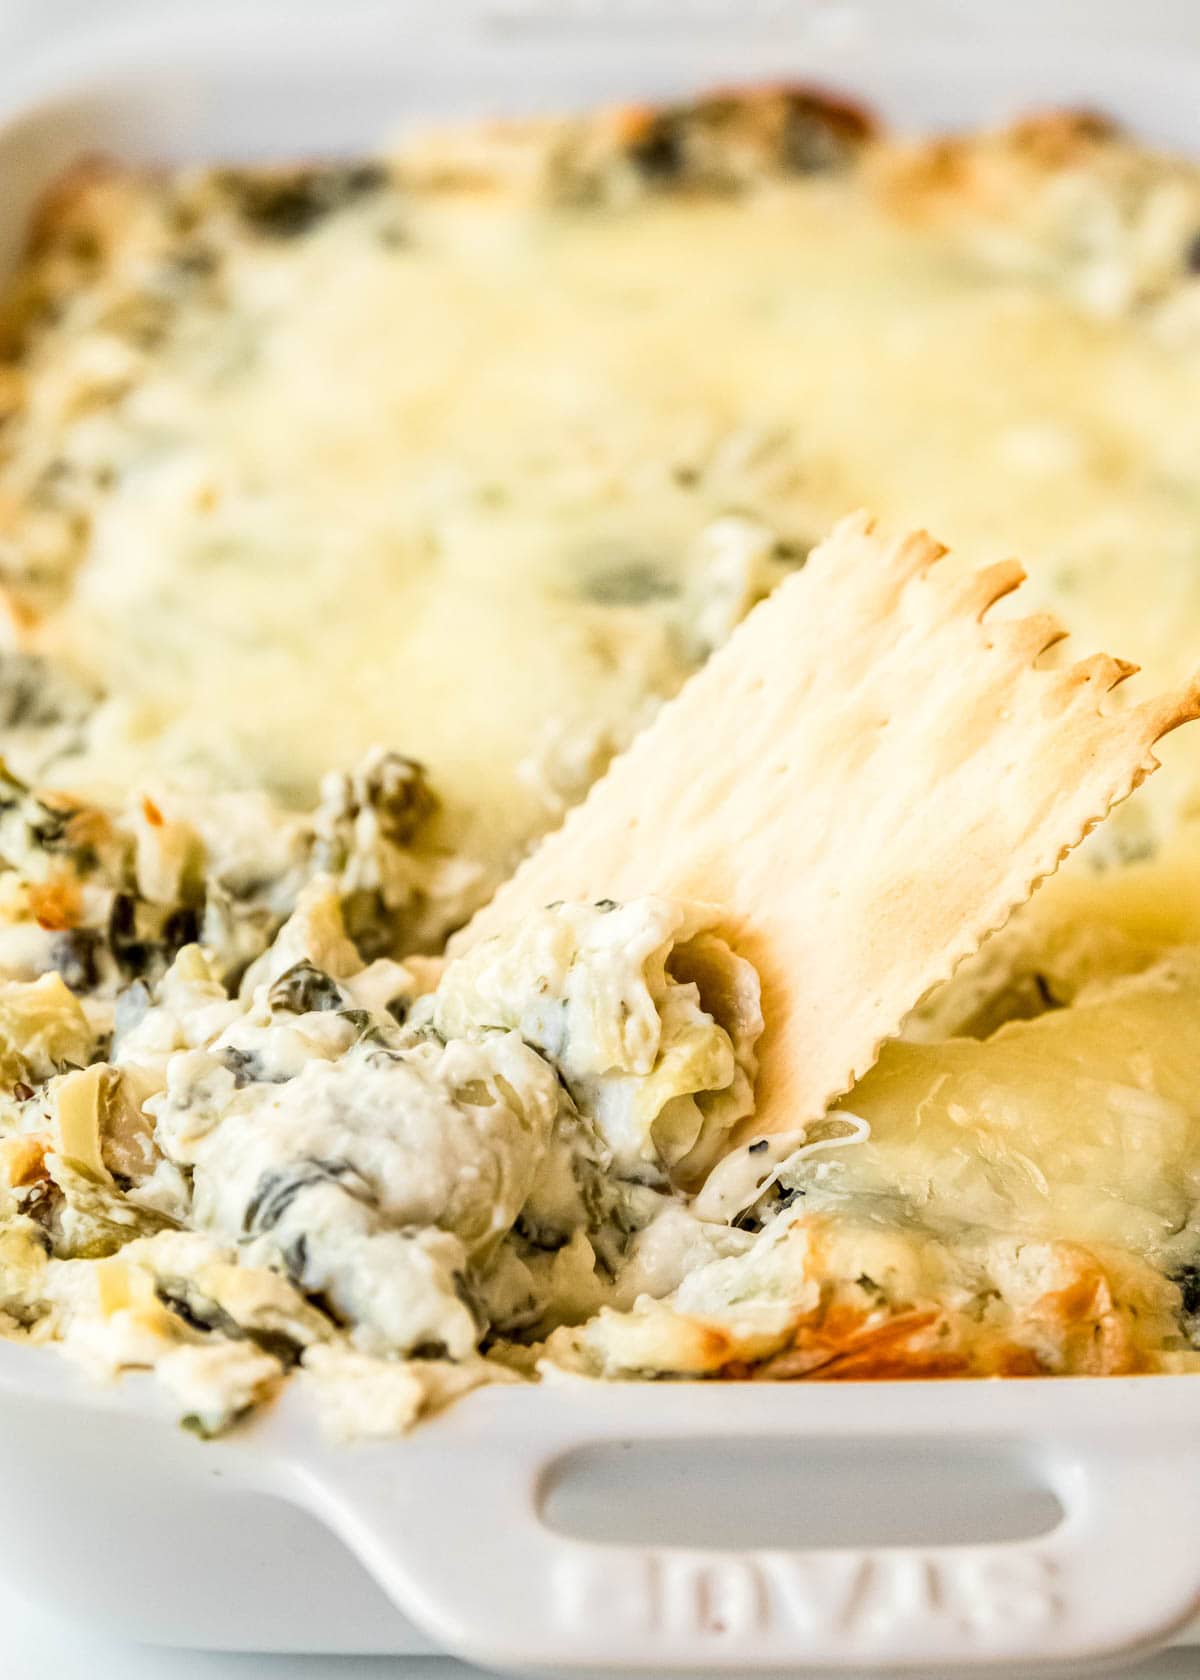 spinach artichoke dip being scooped up onto a cracker